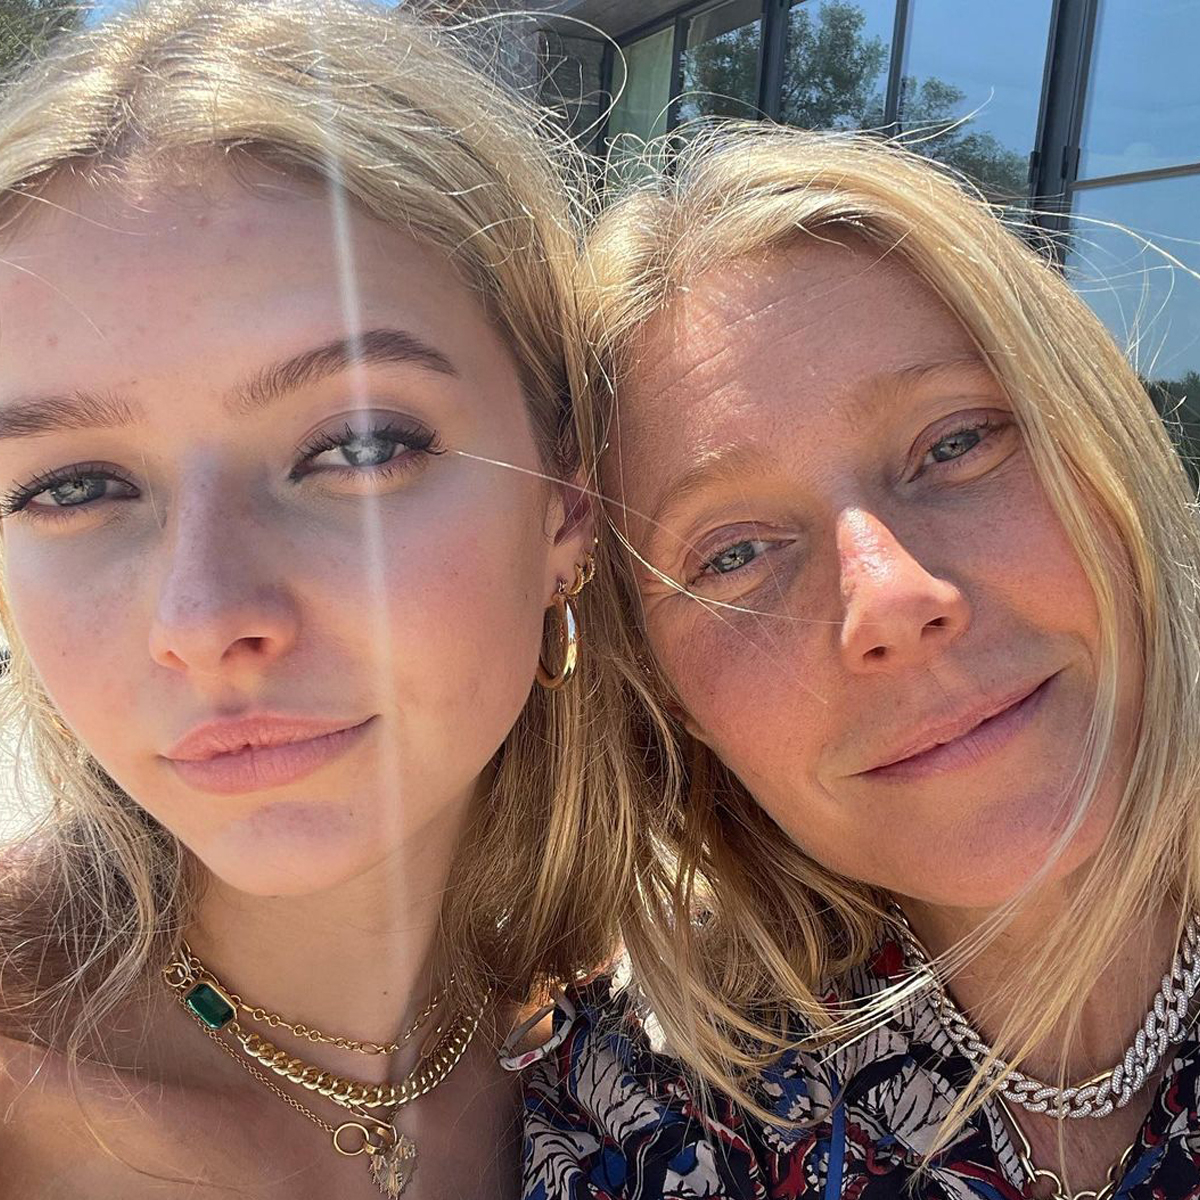 Gwyneth Paltrow Celebrates Her And Chris Martin's "Special" Daughter Apple On Her 18th Birthday